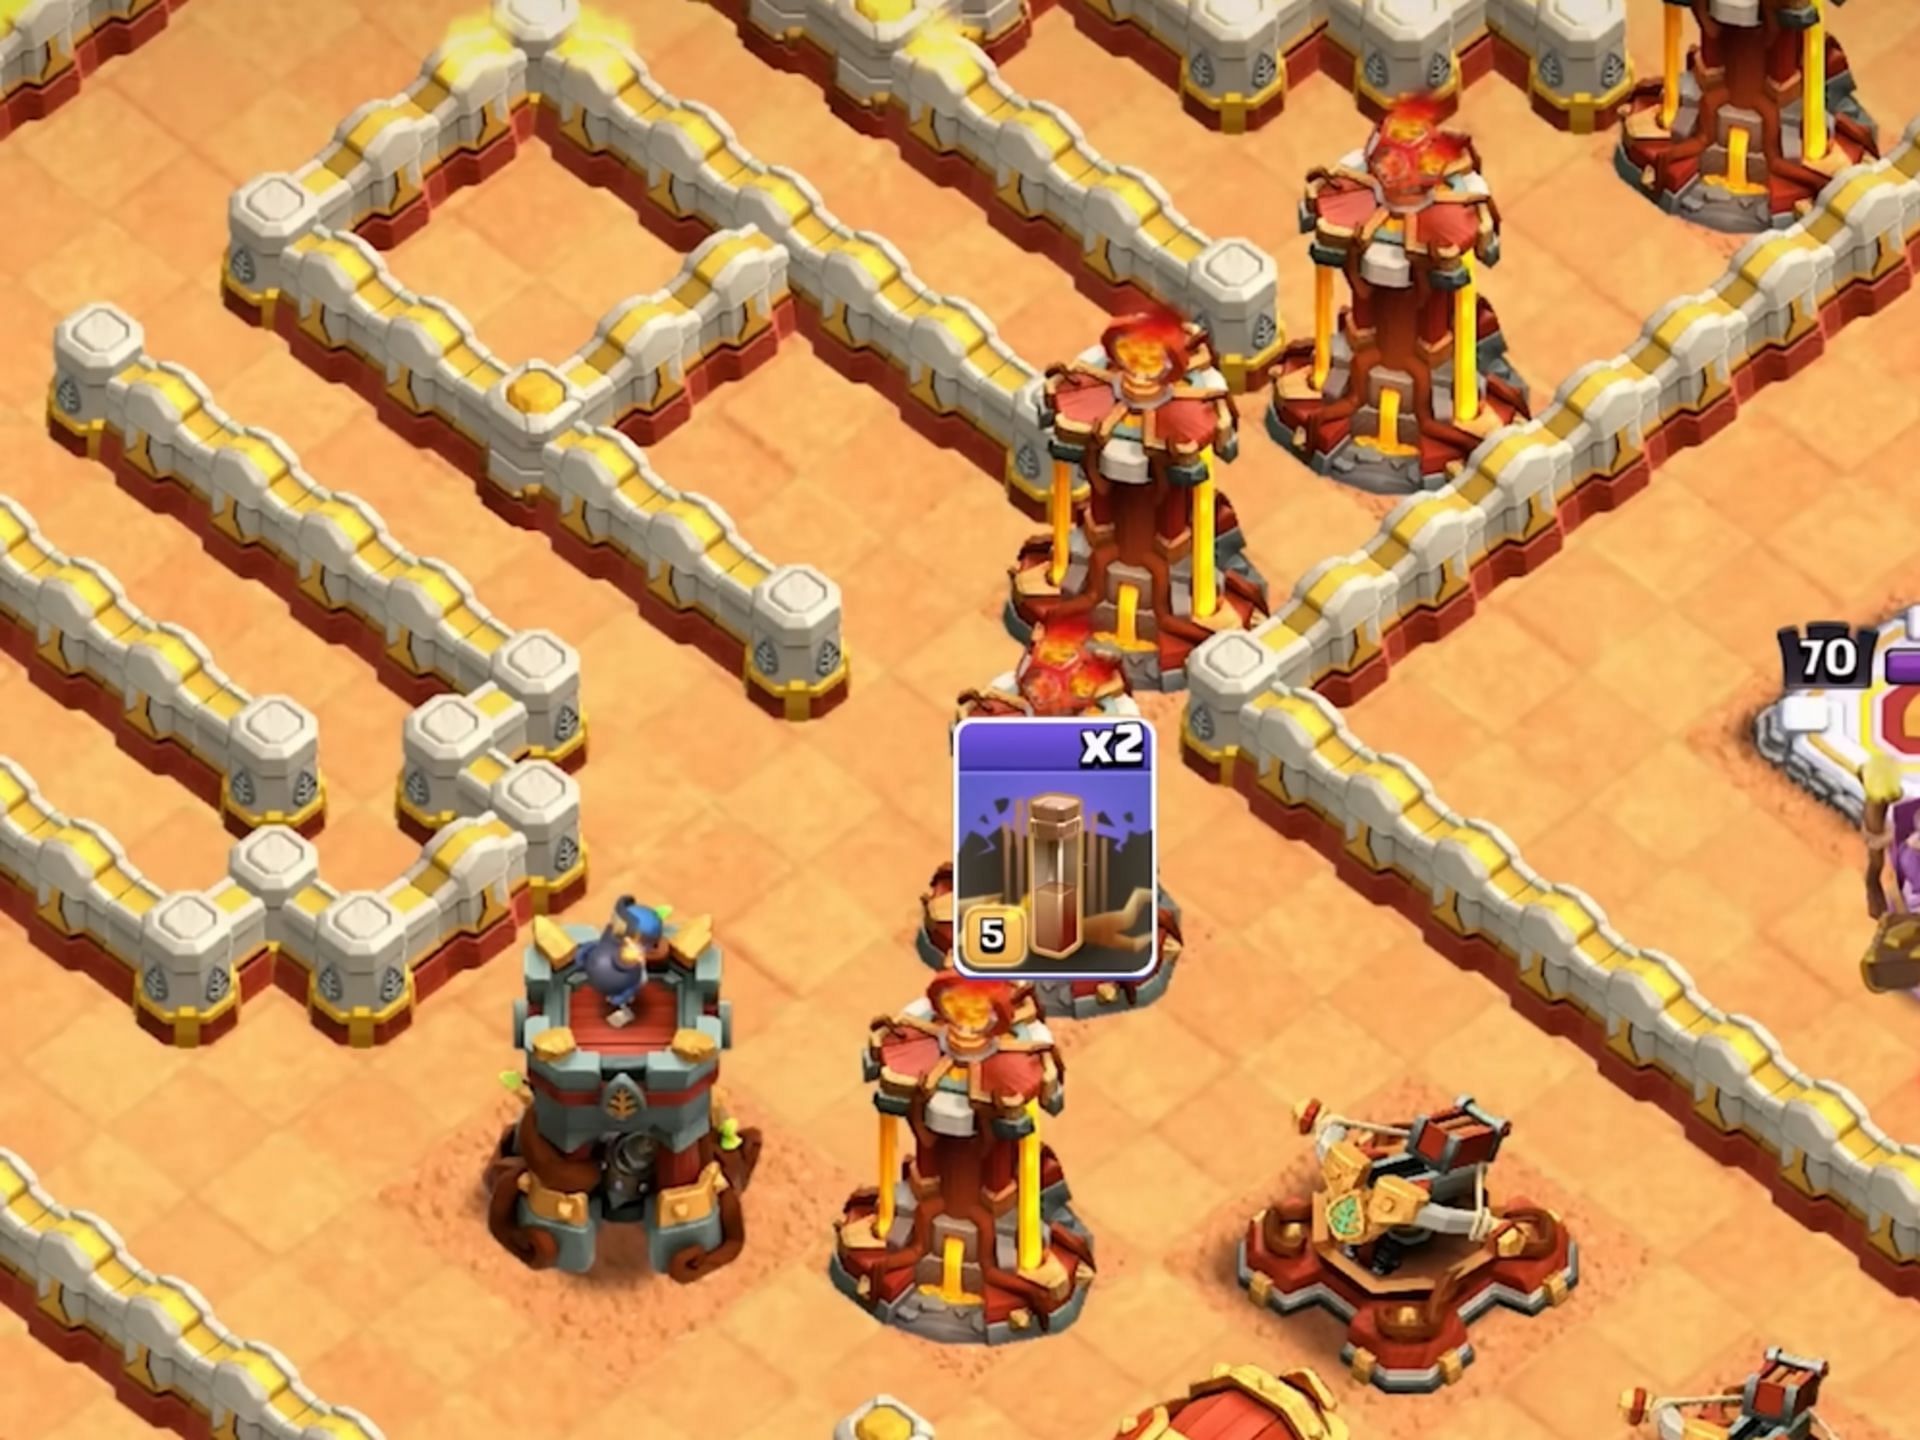 Earthquake Spell placement (Image via Supercell)